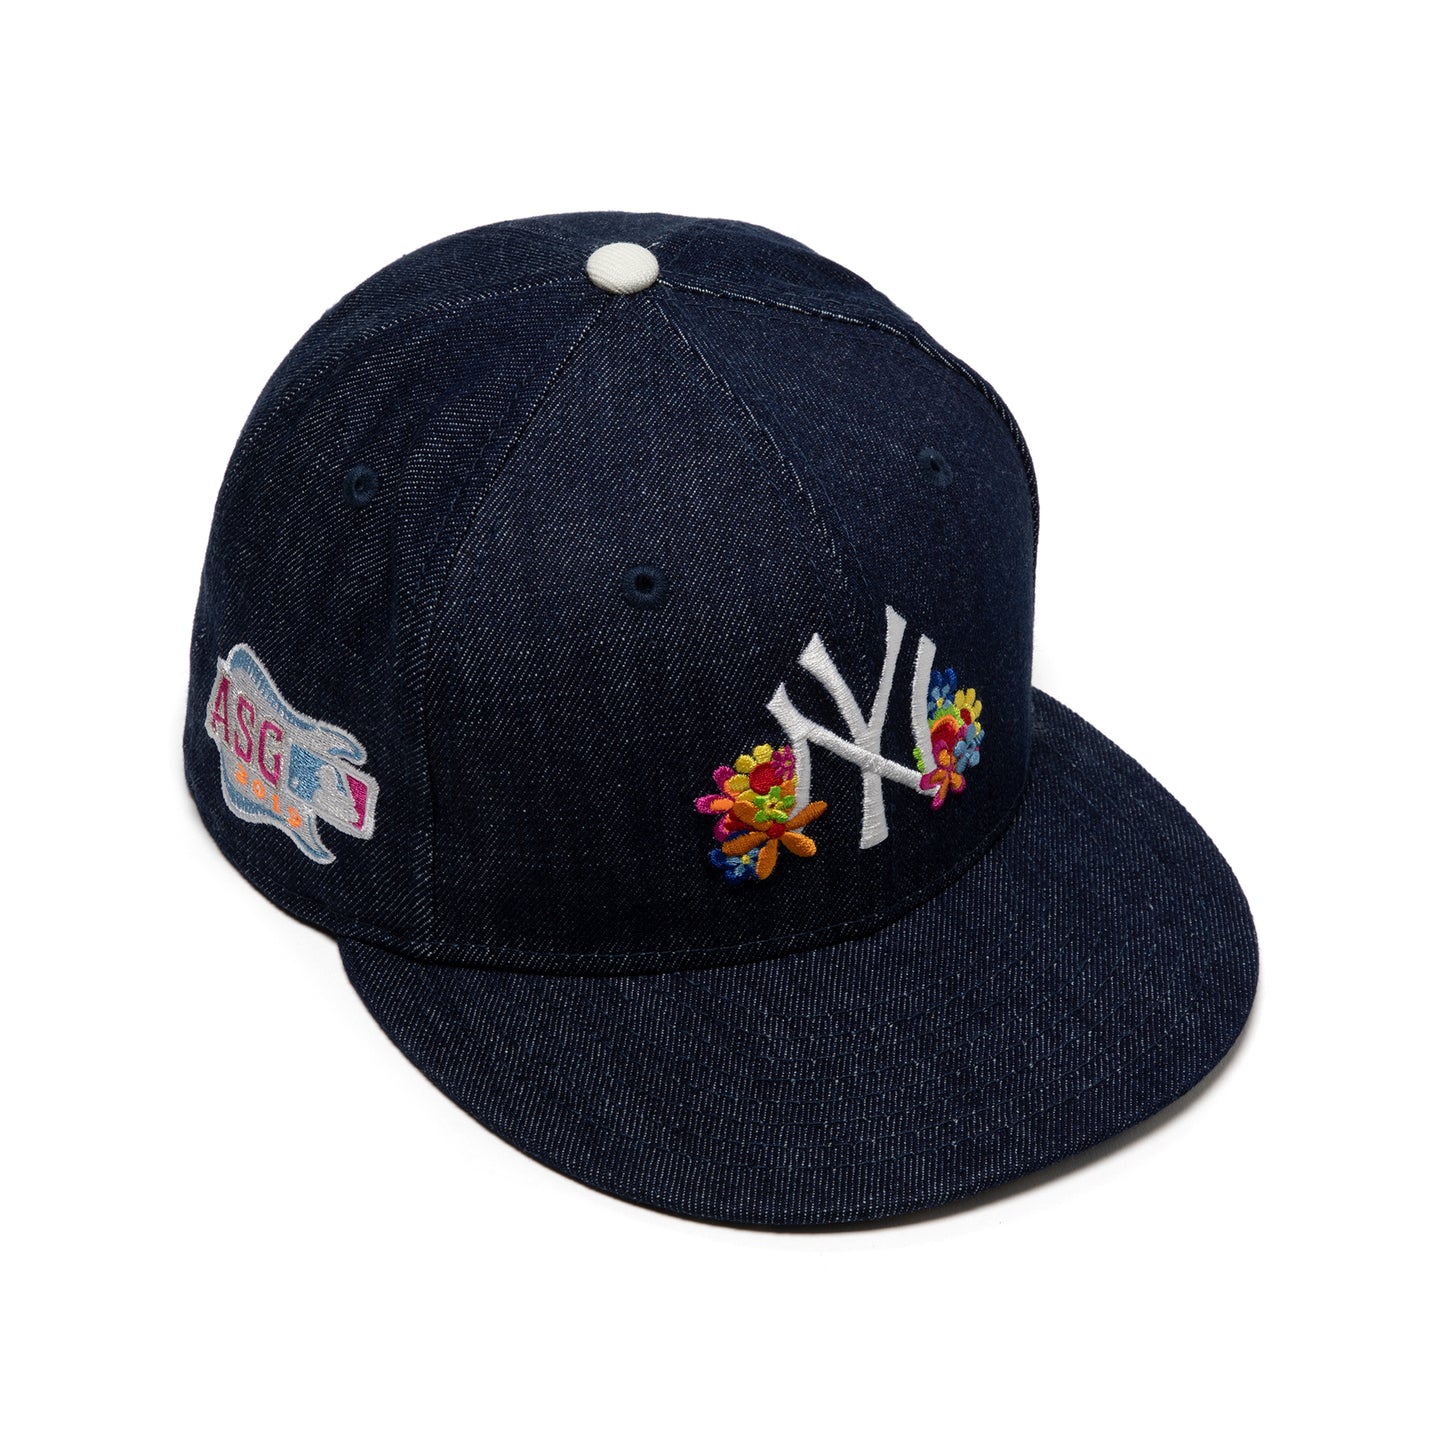 Concepts x New Era 59Fifty New York Yankees Fitted Hat (Navy/Denim)